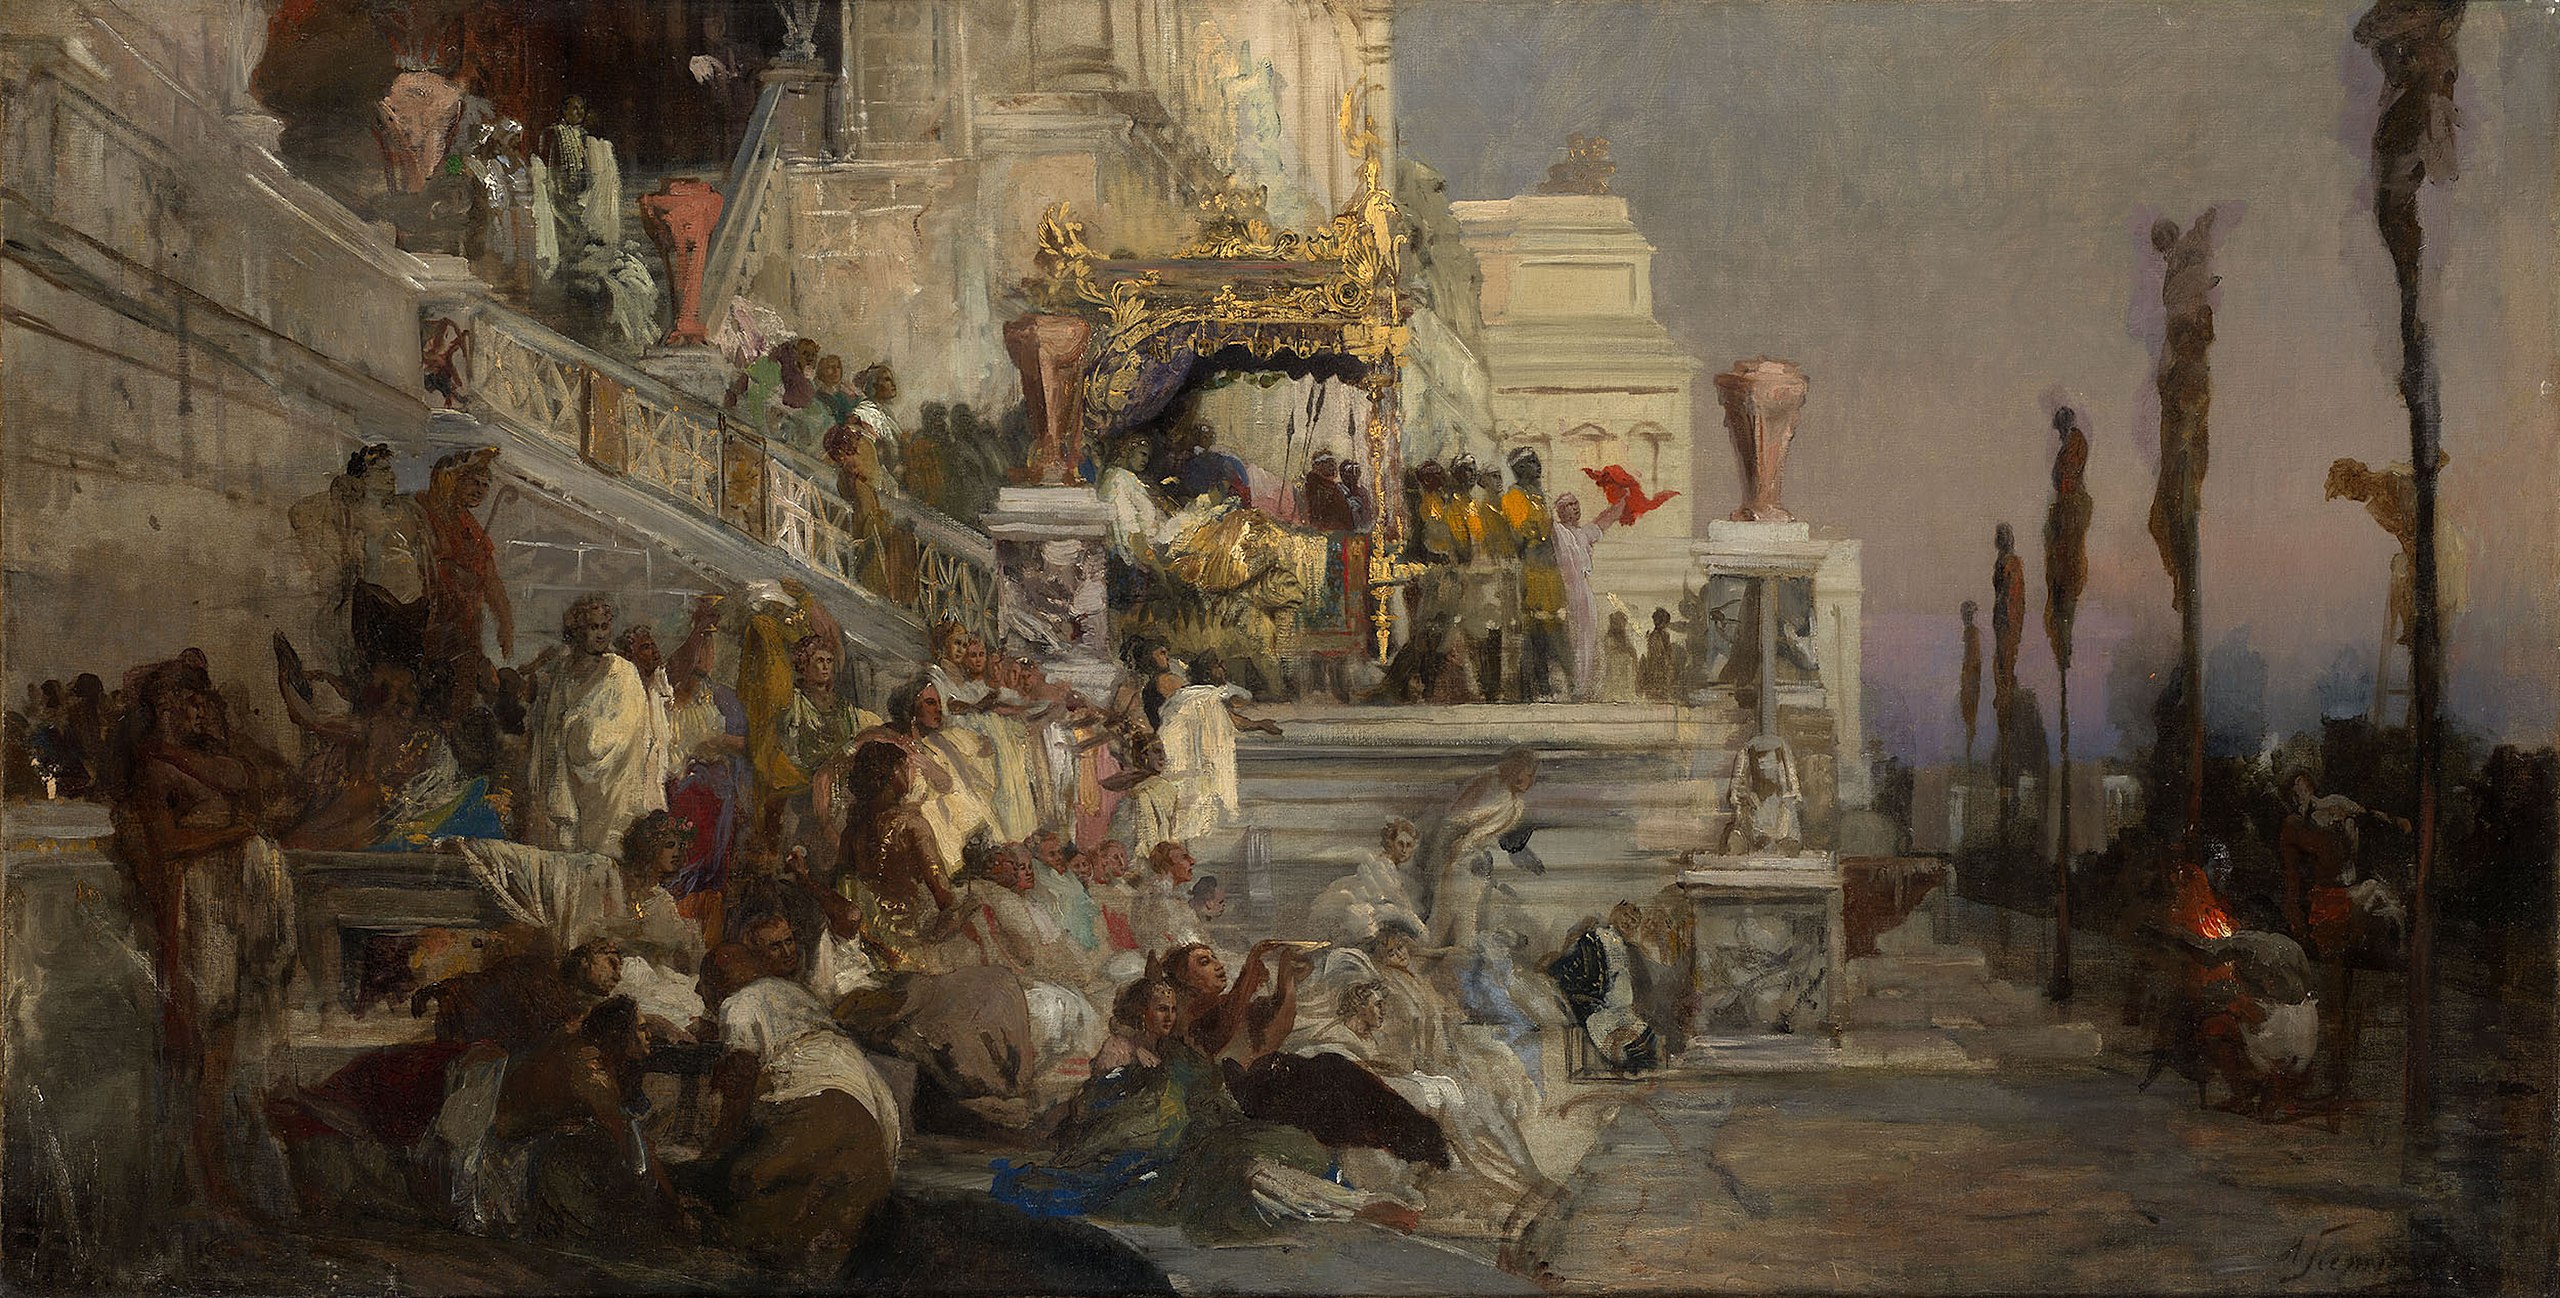 A painting of people gathered in front of a temple during Nero's reign.